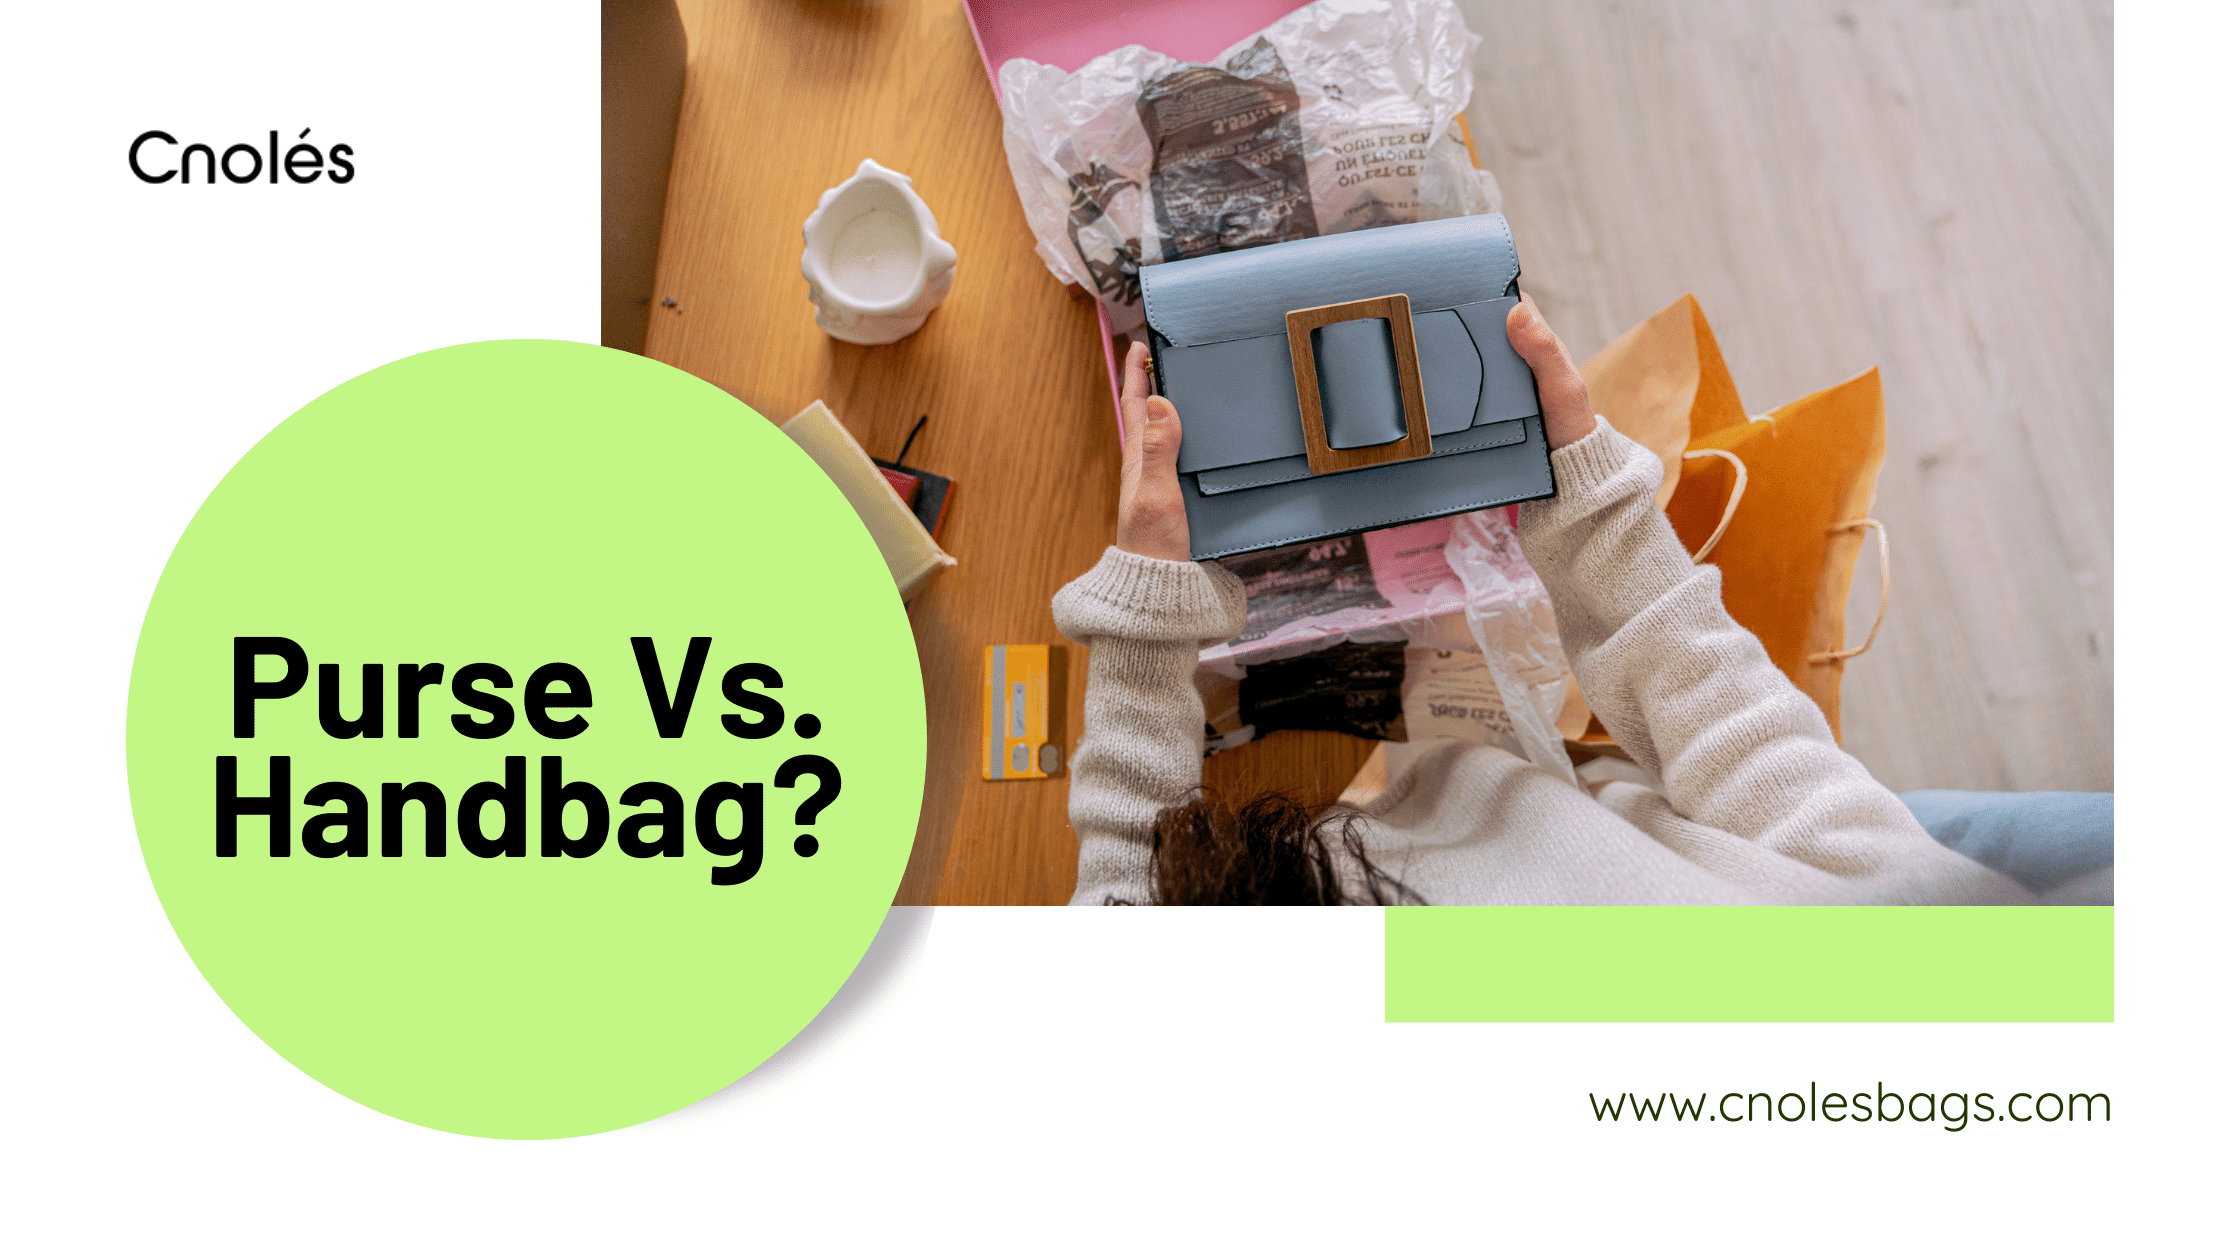 What's the difference between purse and handbag?